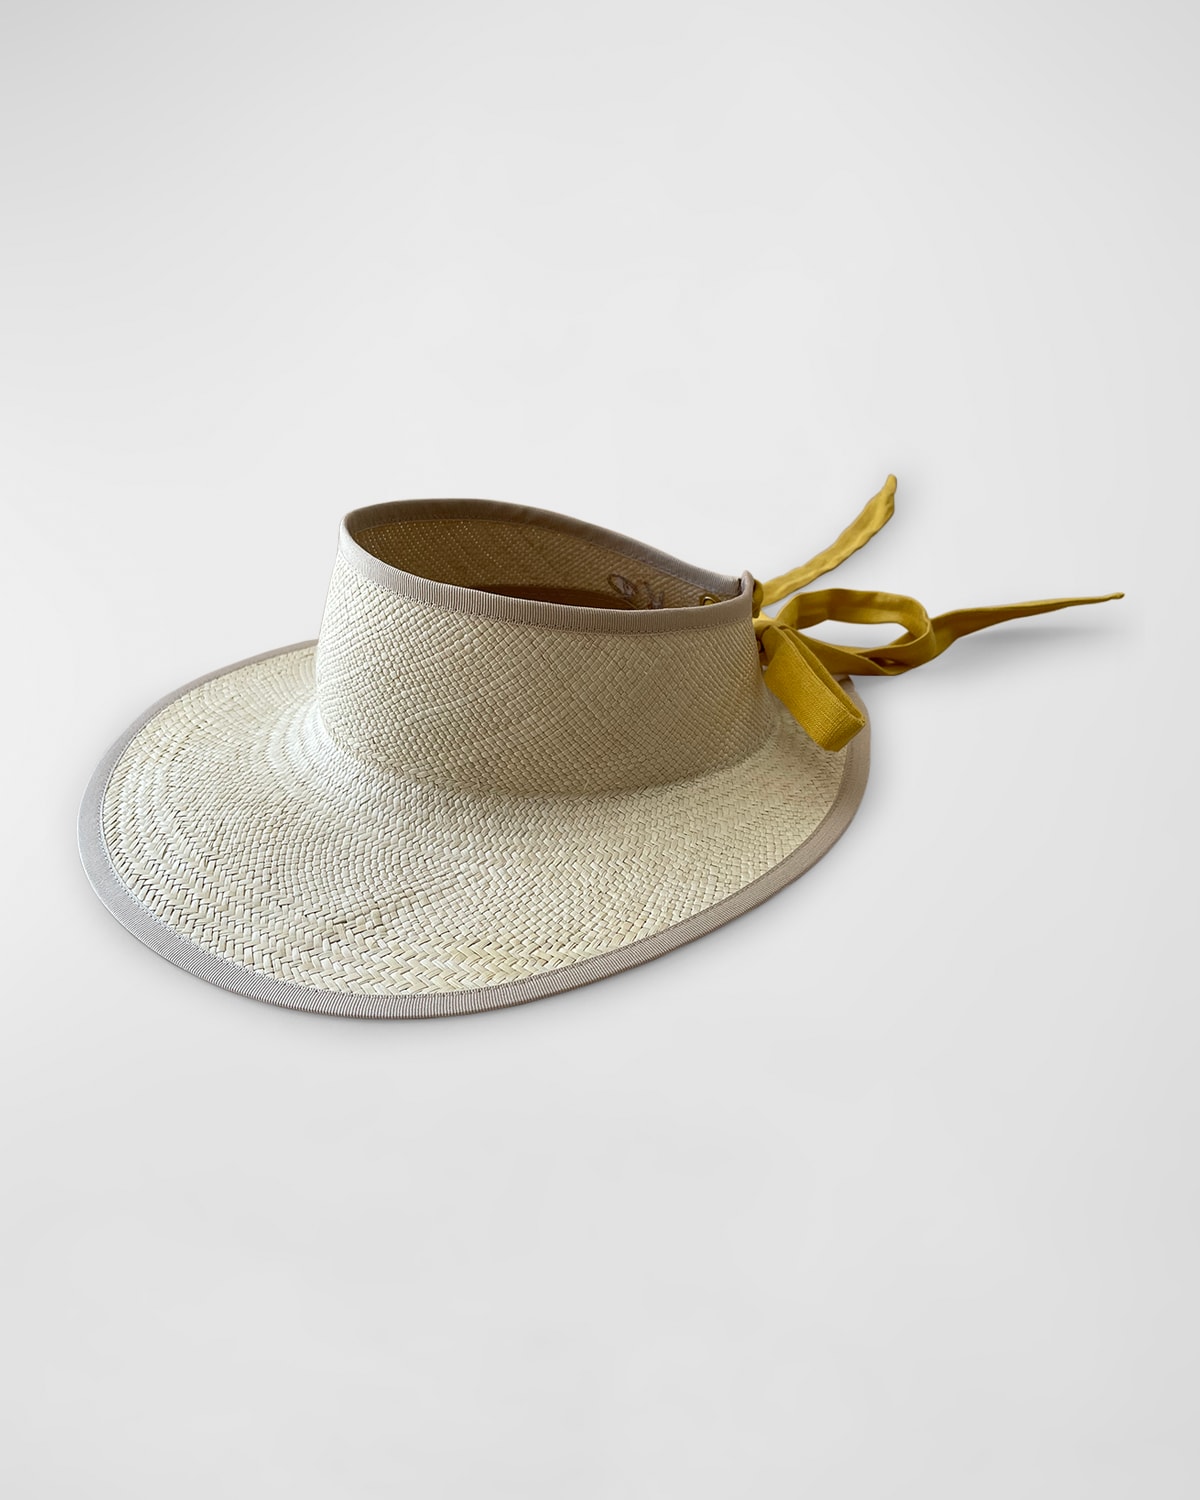 Mia Woven Straw Visor With a Linen Scarf